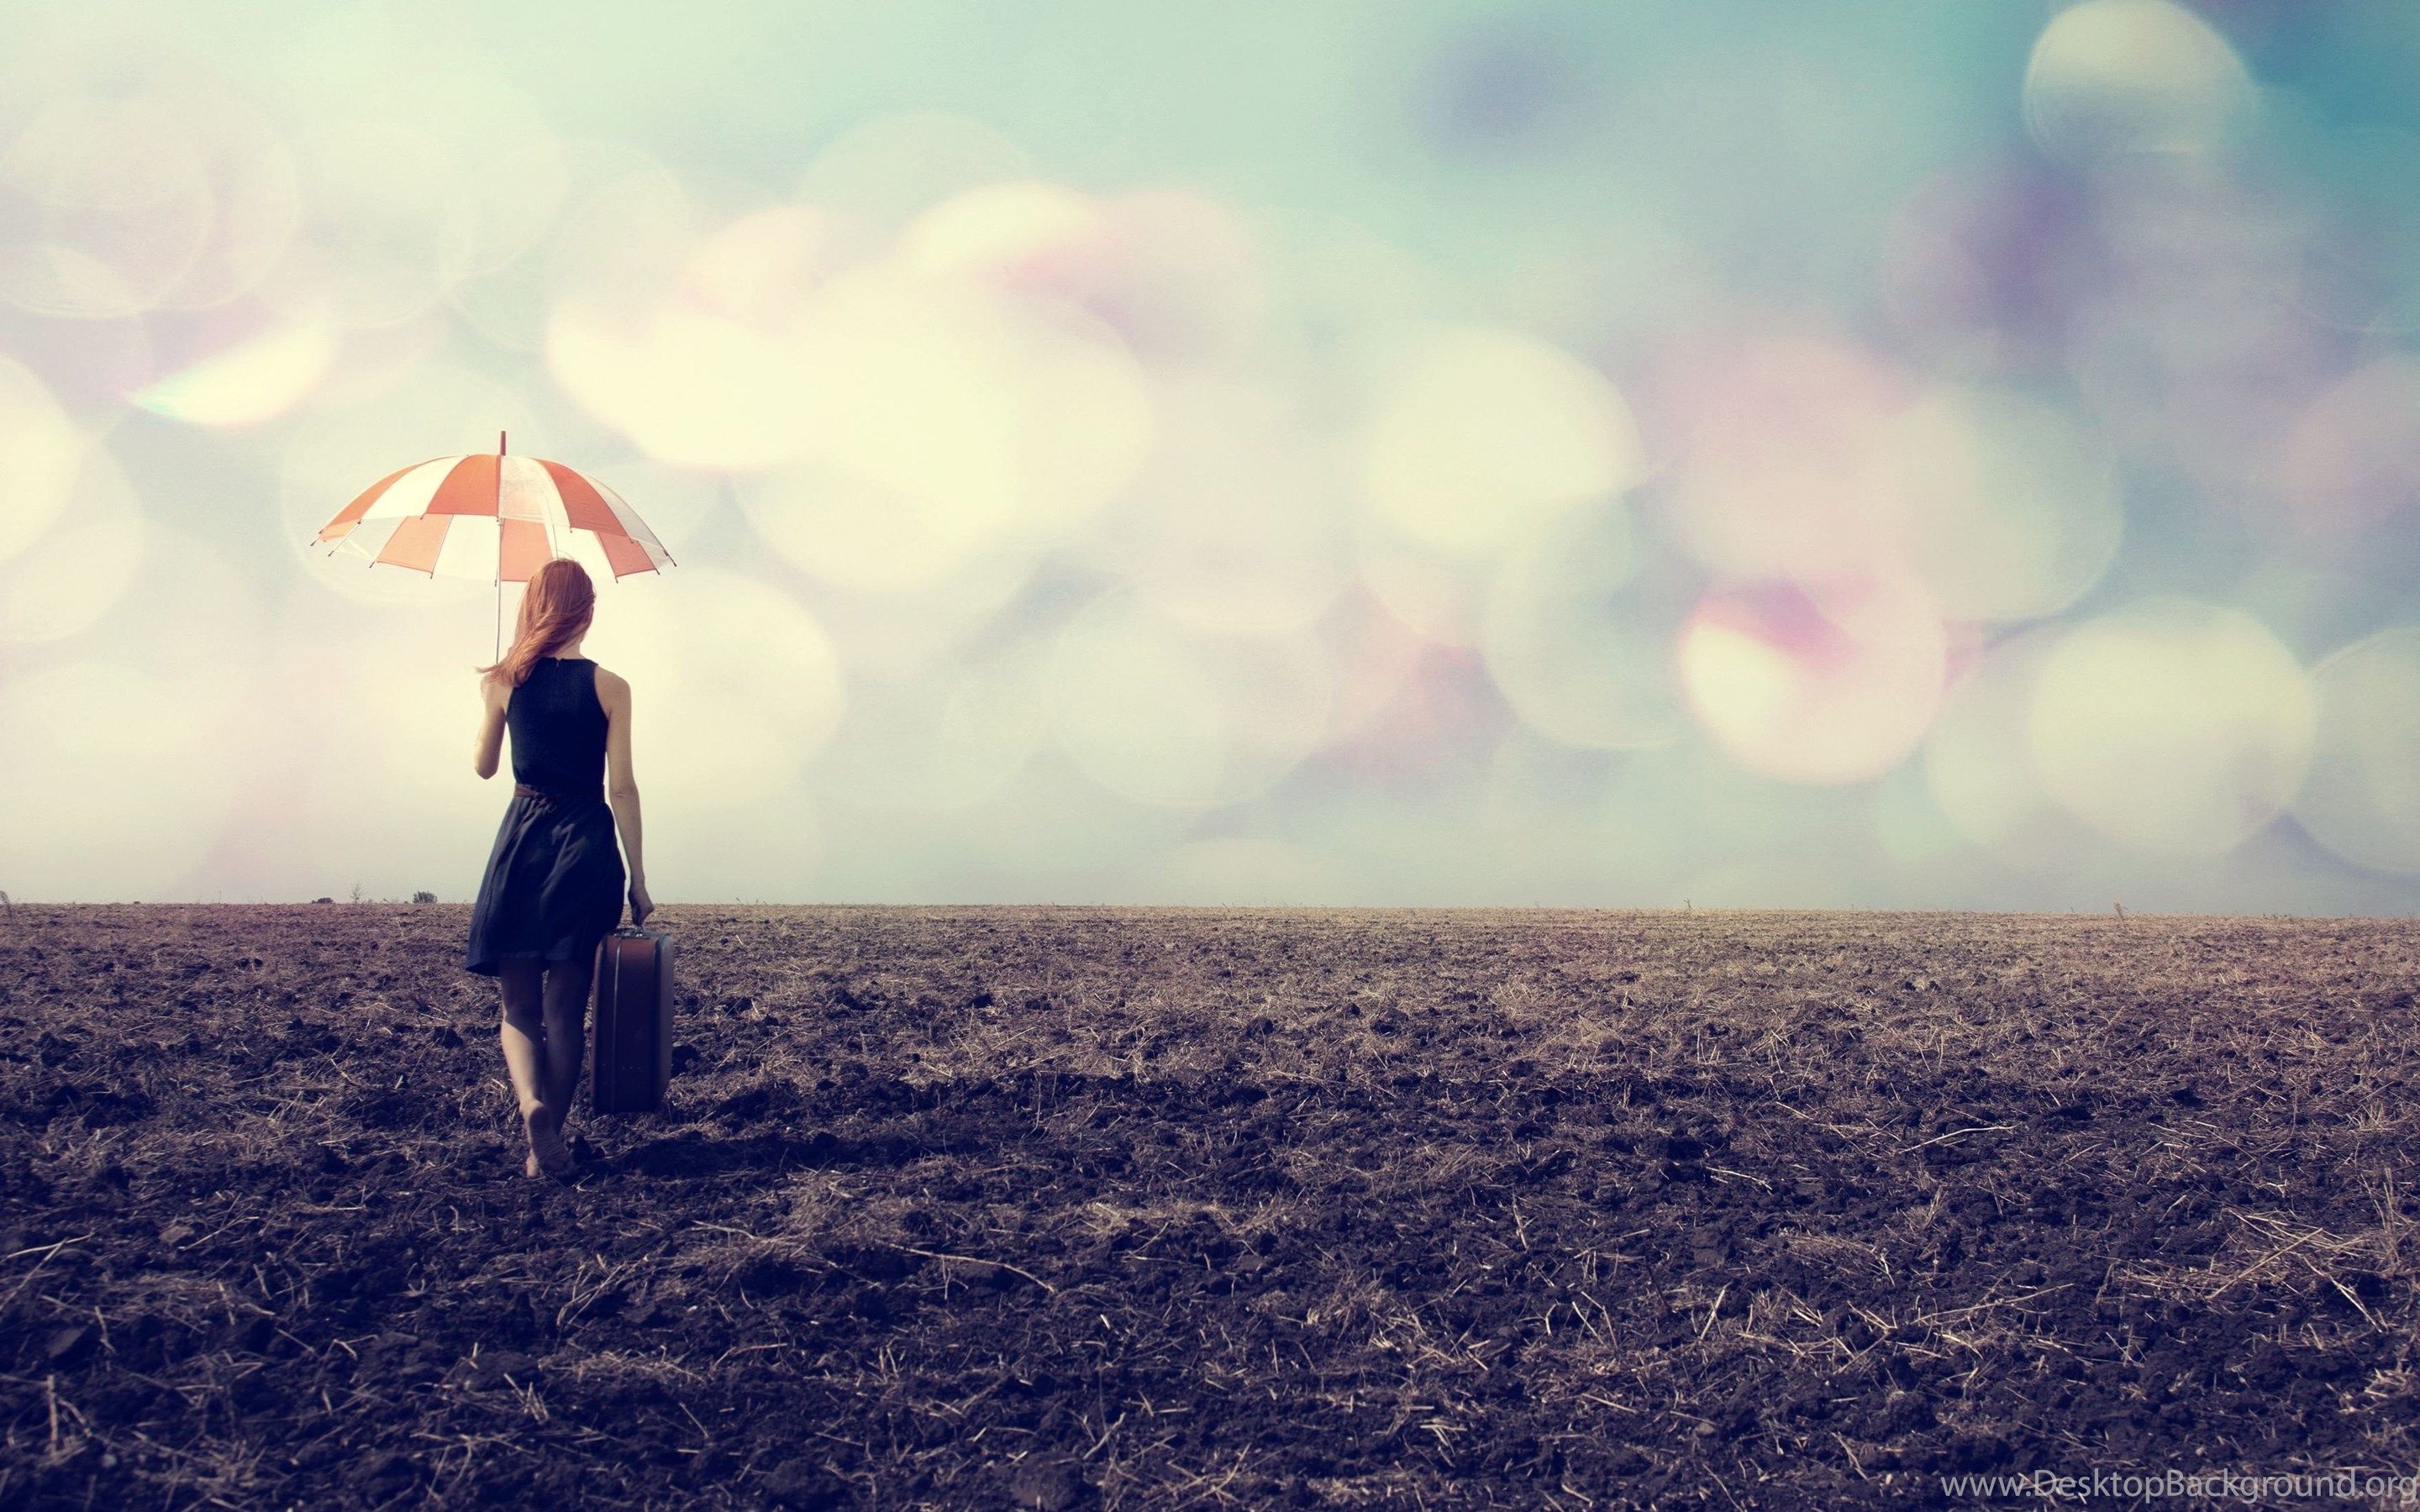 Photo Vintage, Girl, Looking, Alone, Autumn, Image, Wallpaper